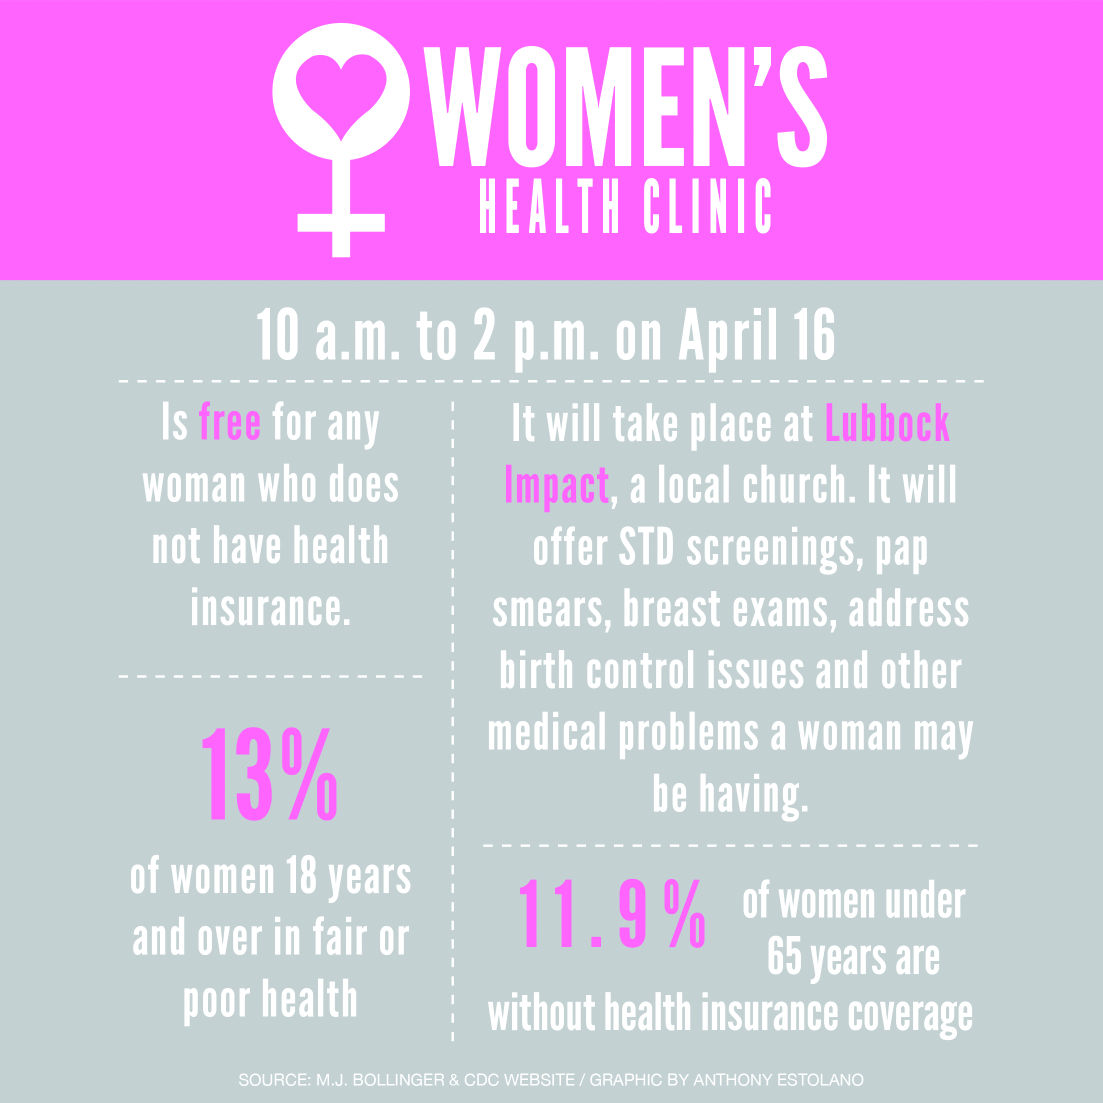 Free Womens Health Clinic To Take Place On April 16 News pertaining to Women’s Free Health Clinic regarding Your house